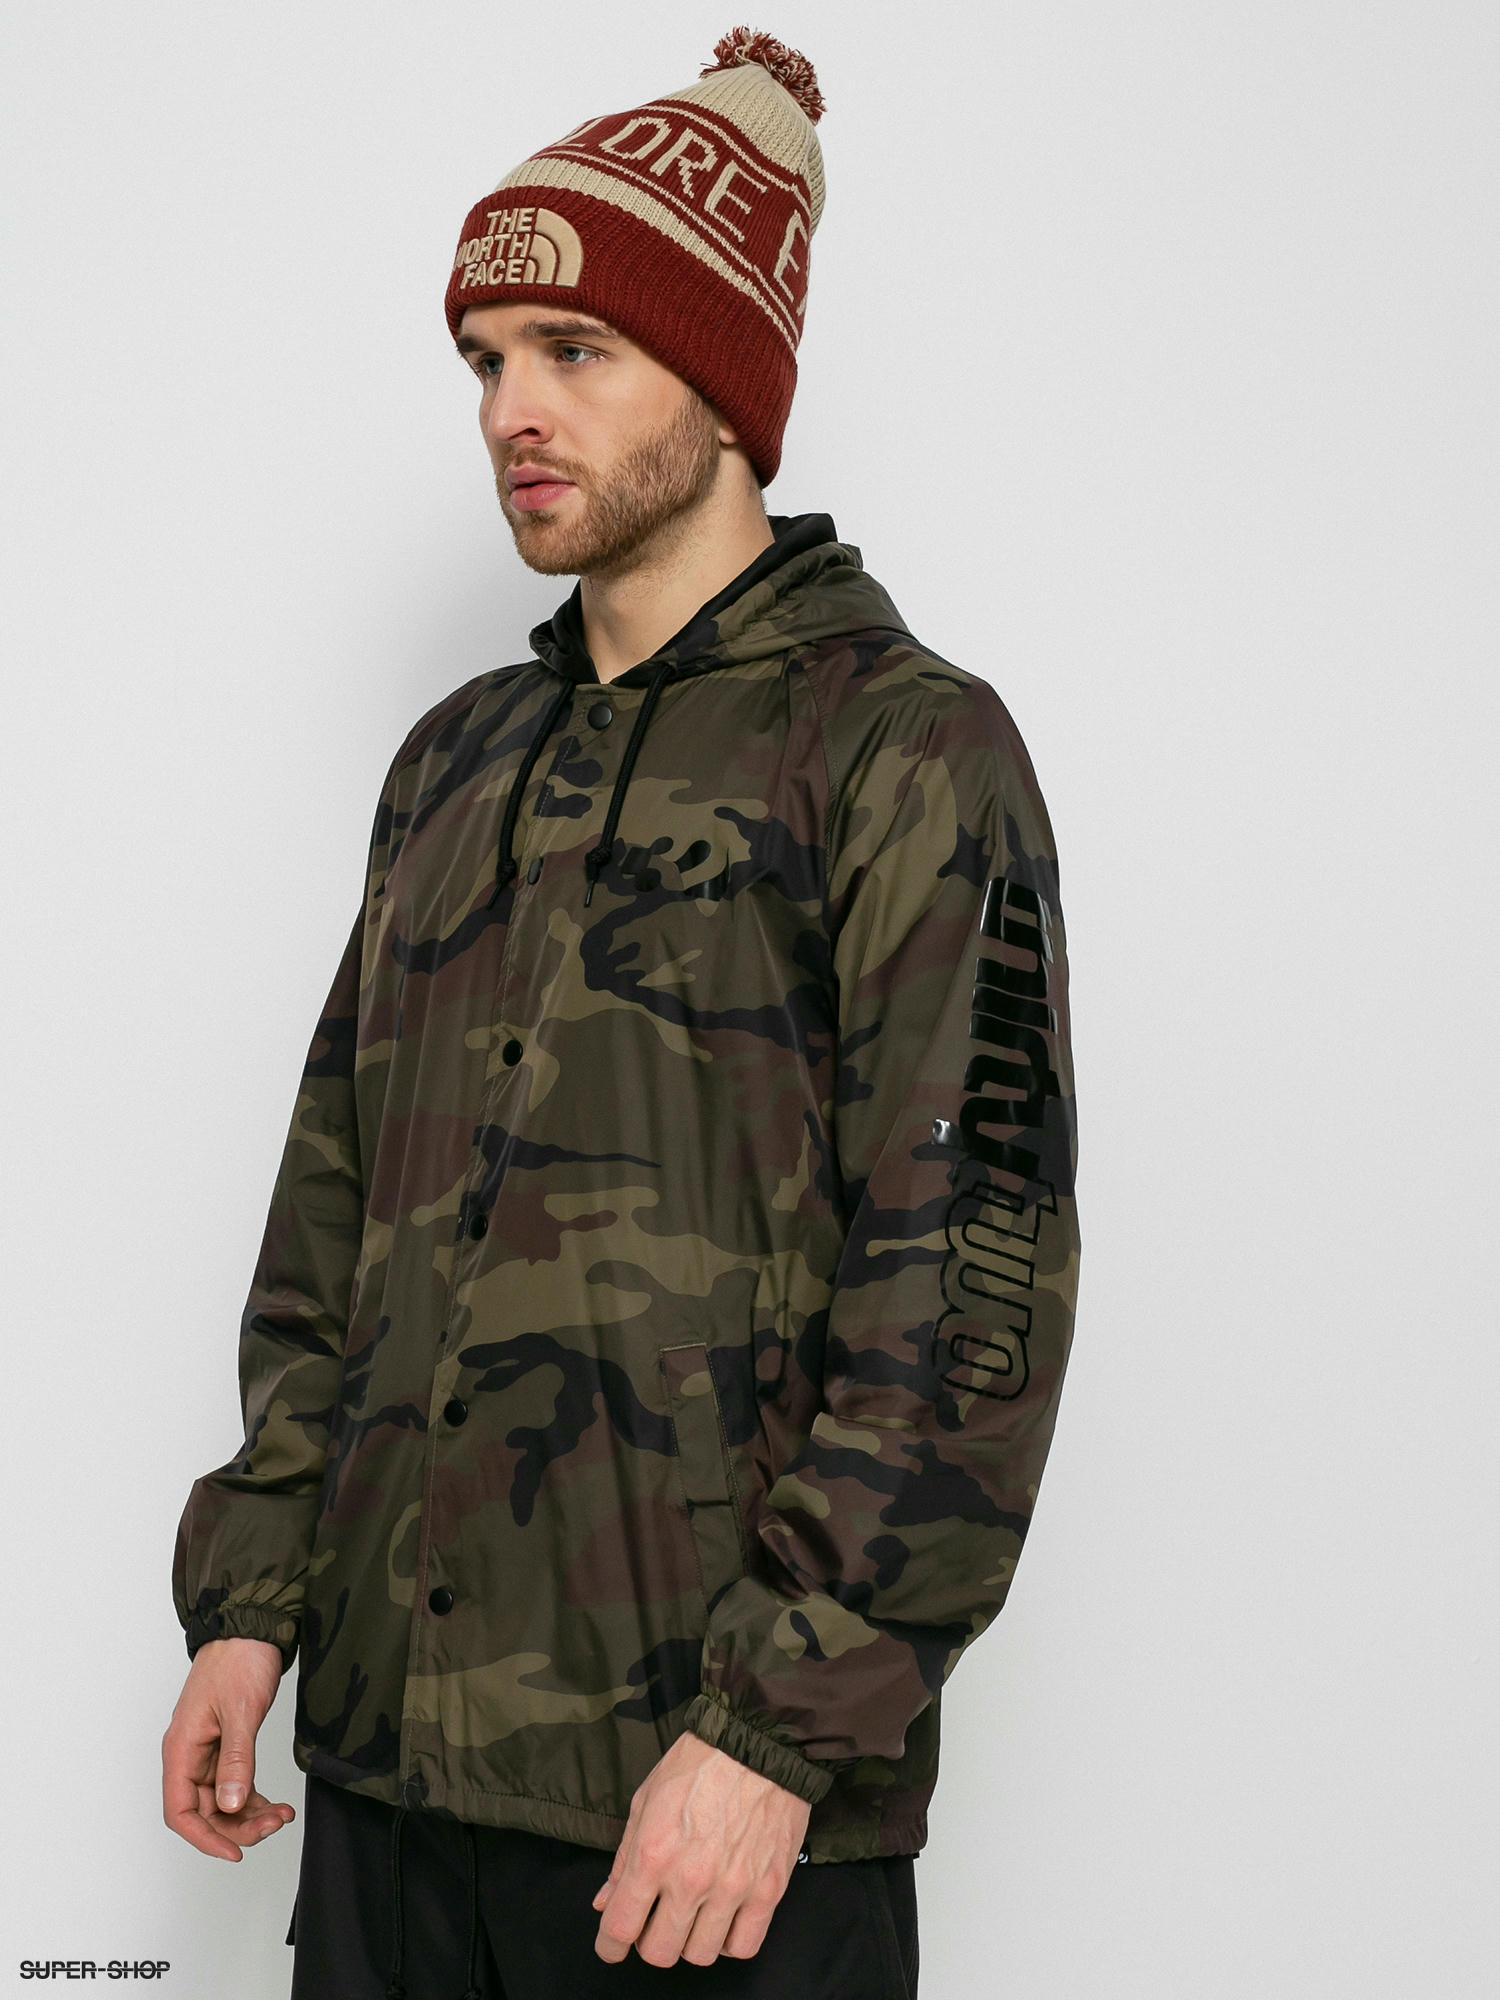 Compare prices for Reversible Camo Double Face Coach Jacket (1A7X4F) in  official stores